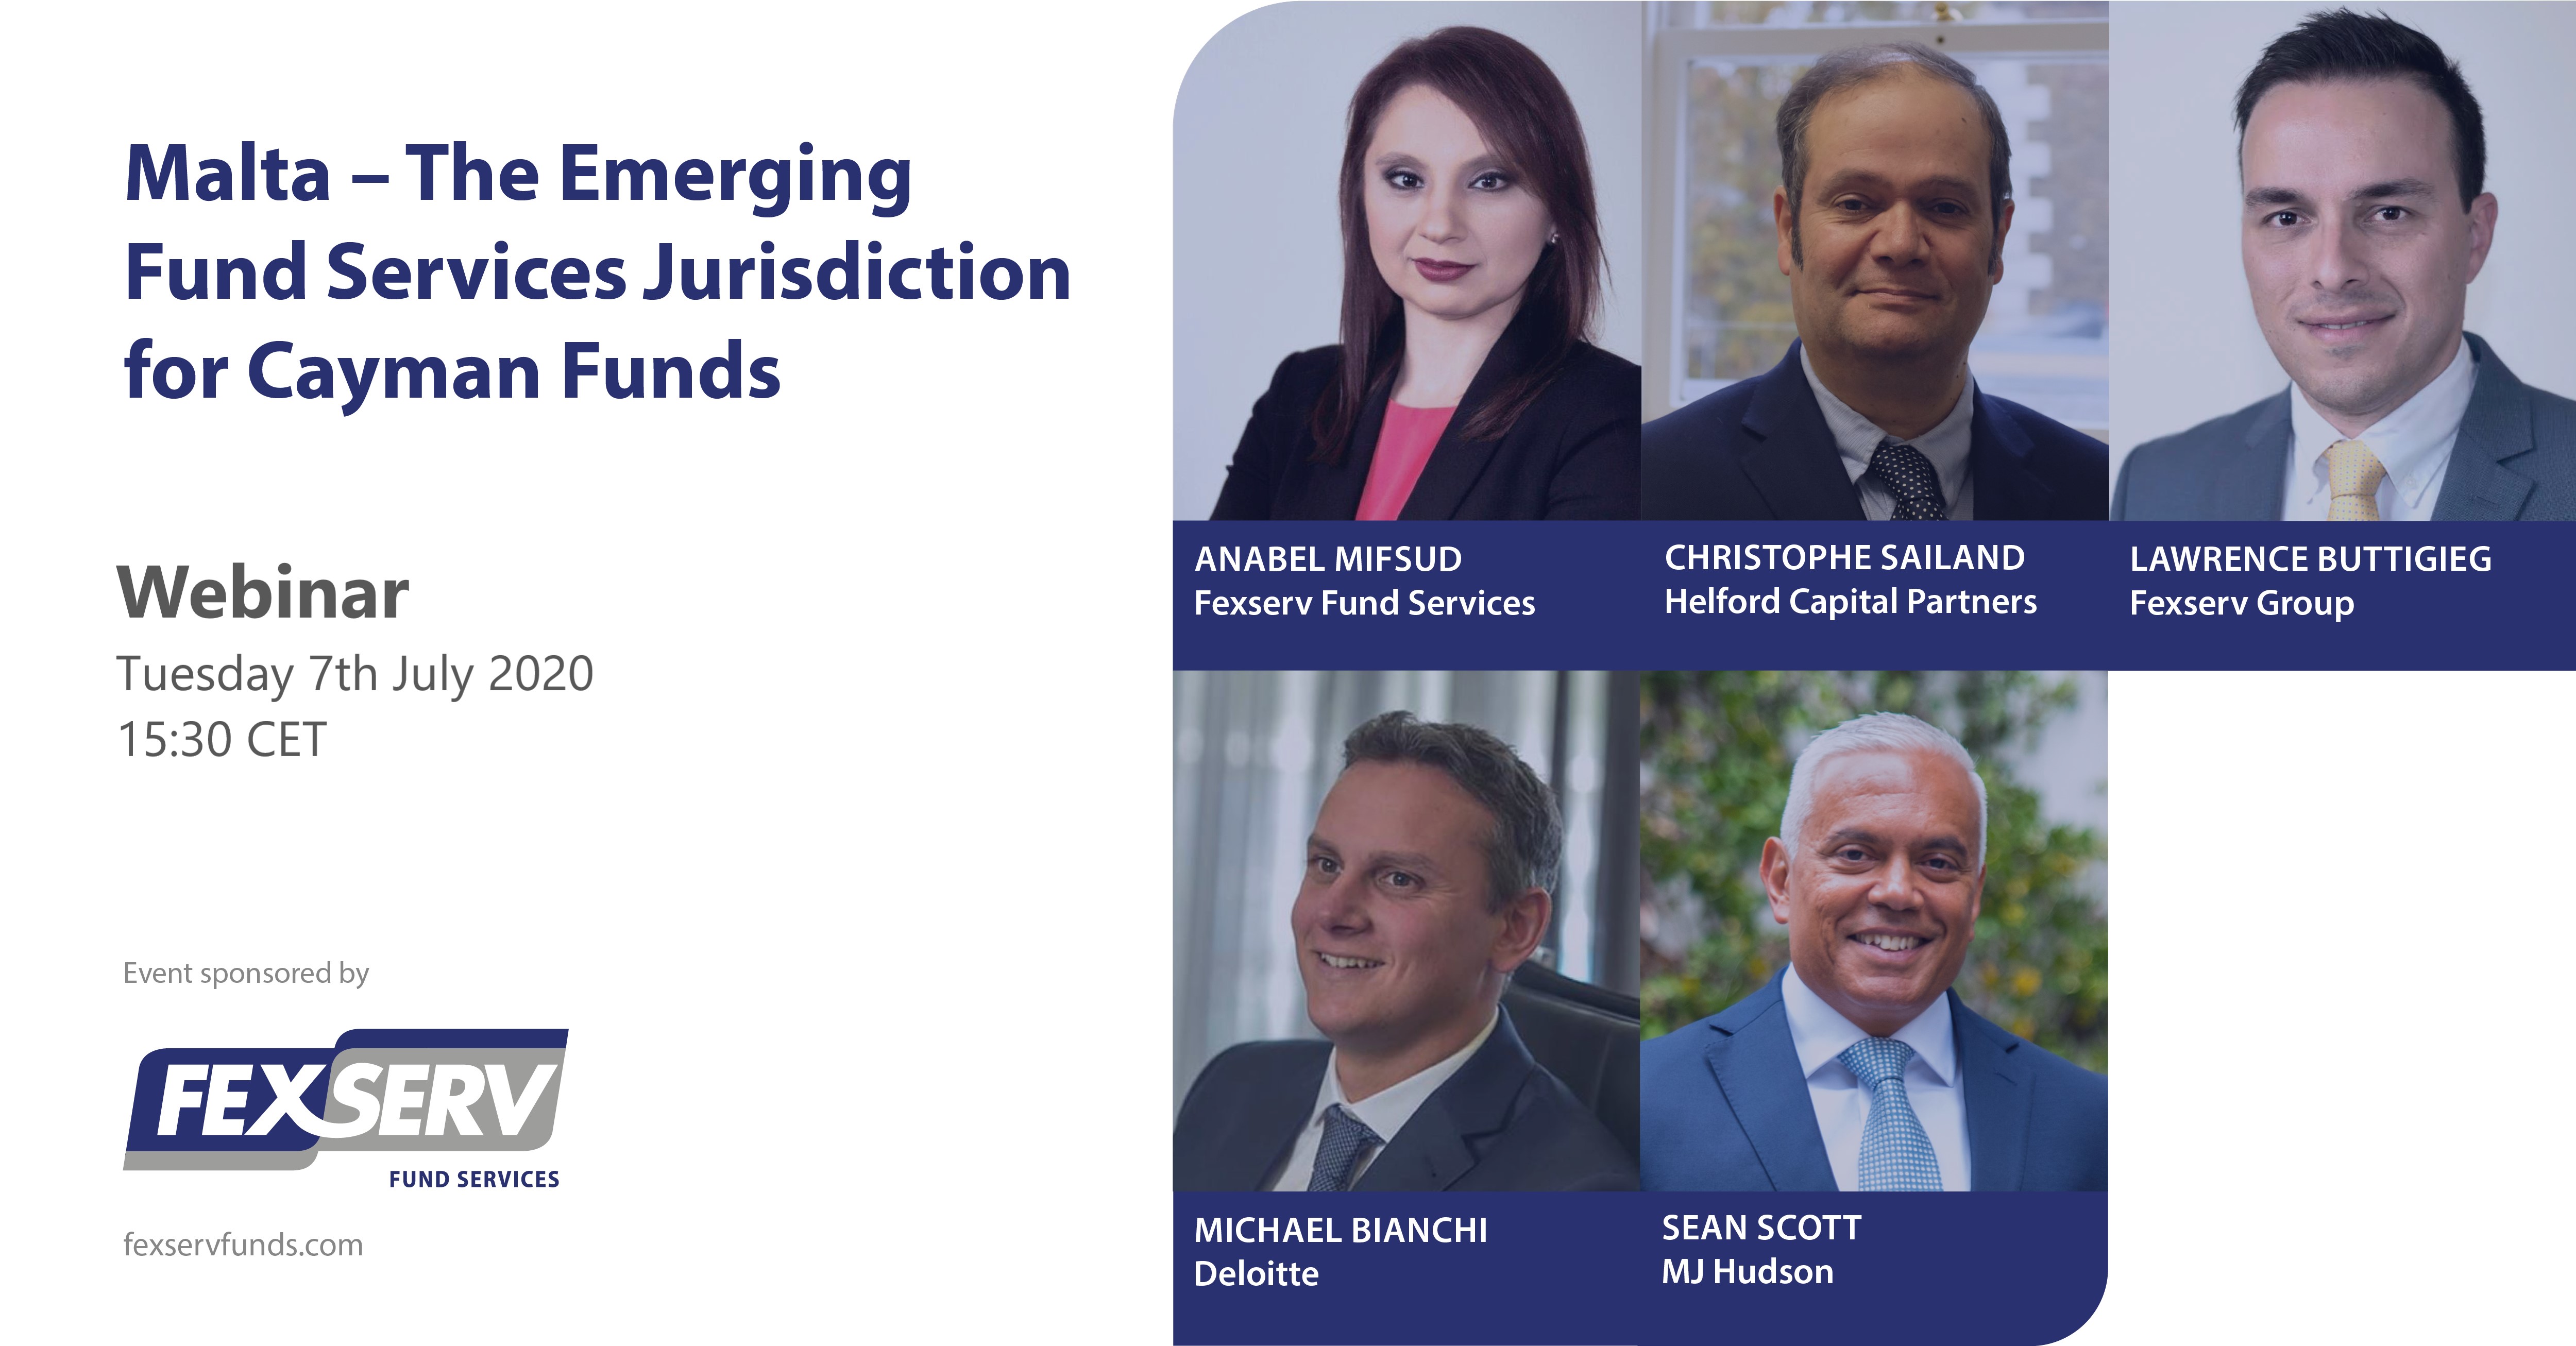 Malta the Emerging Fund Services Jurisdiction for Cayman Funds  organized by Fexserv Fund Services Ltd 